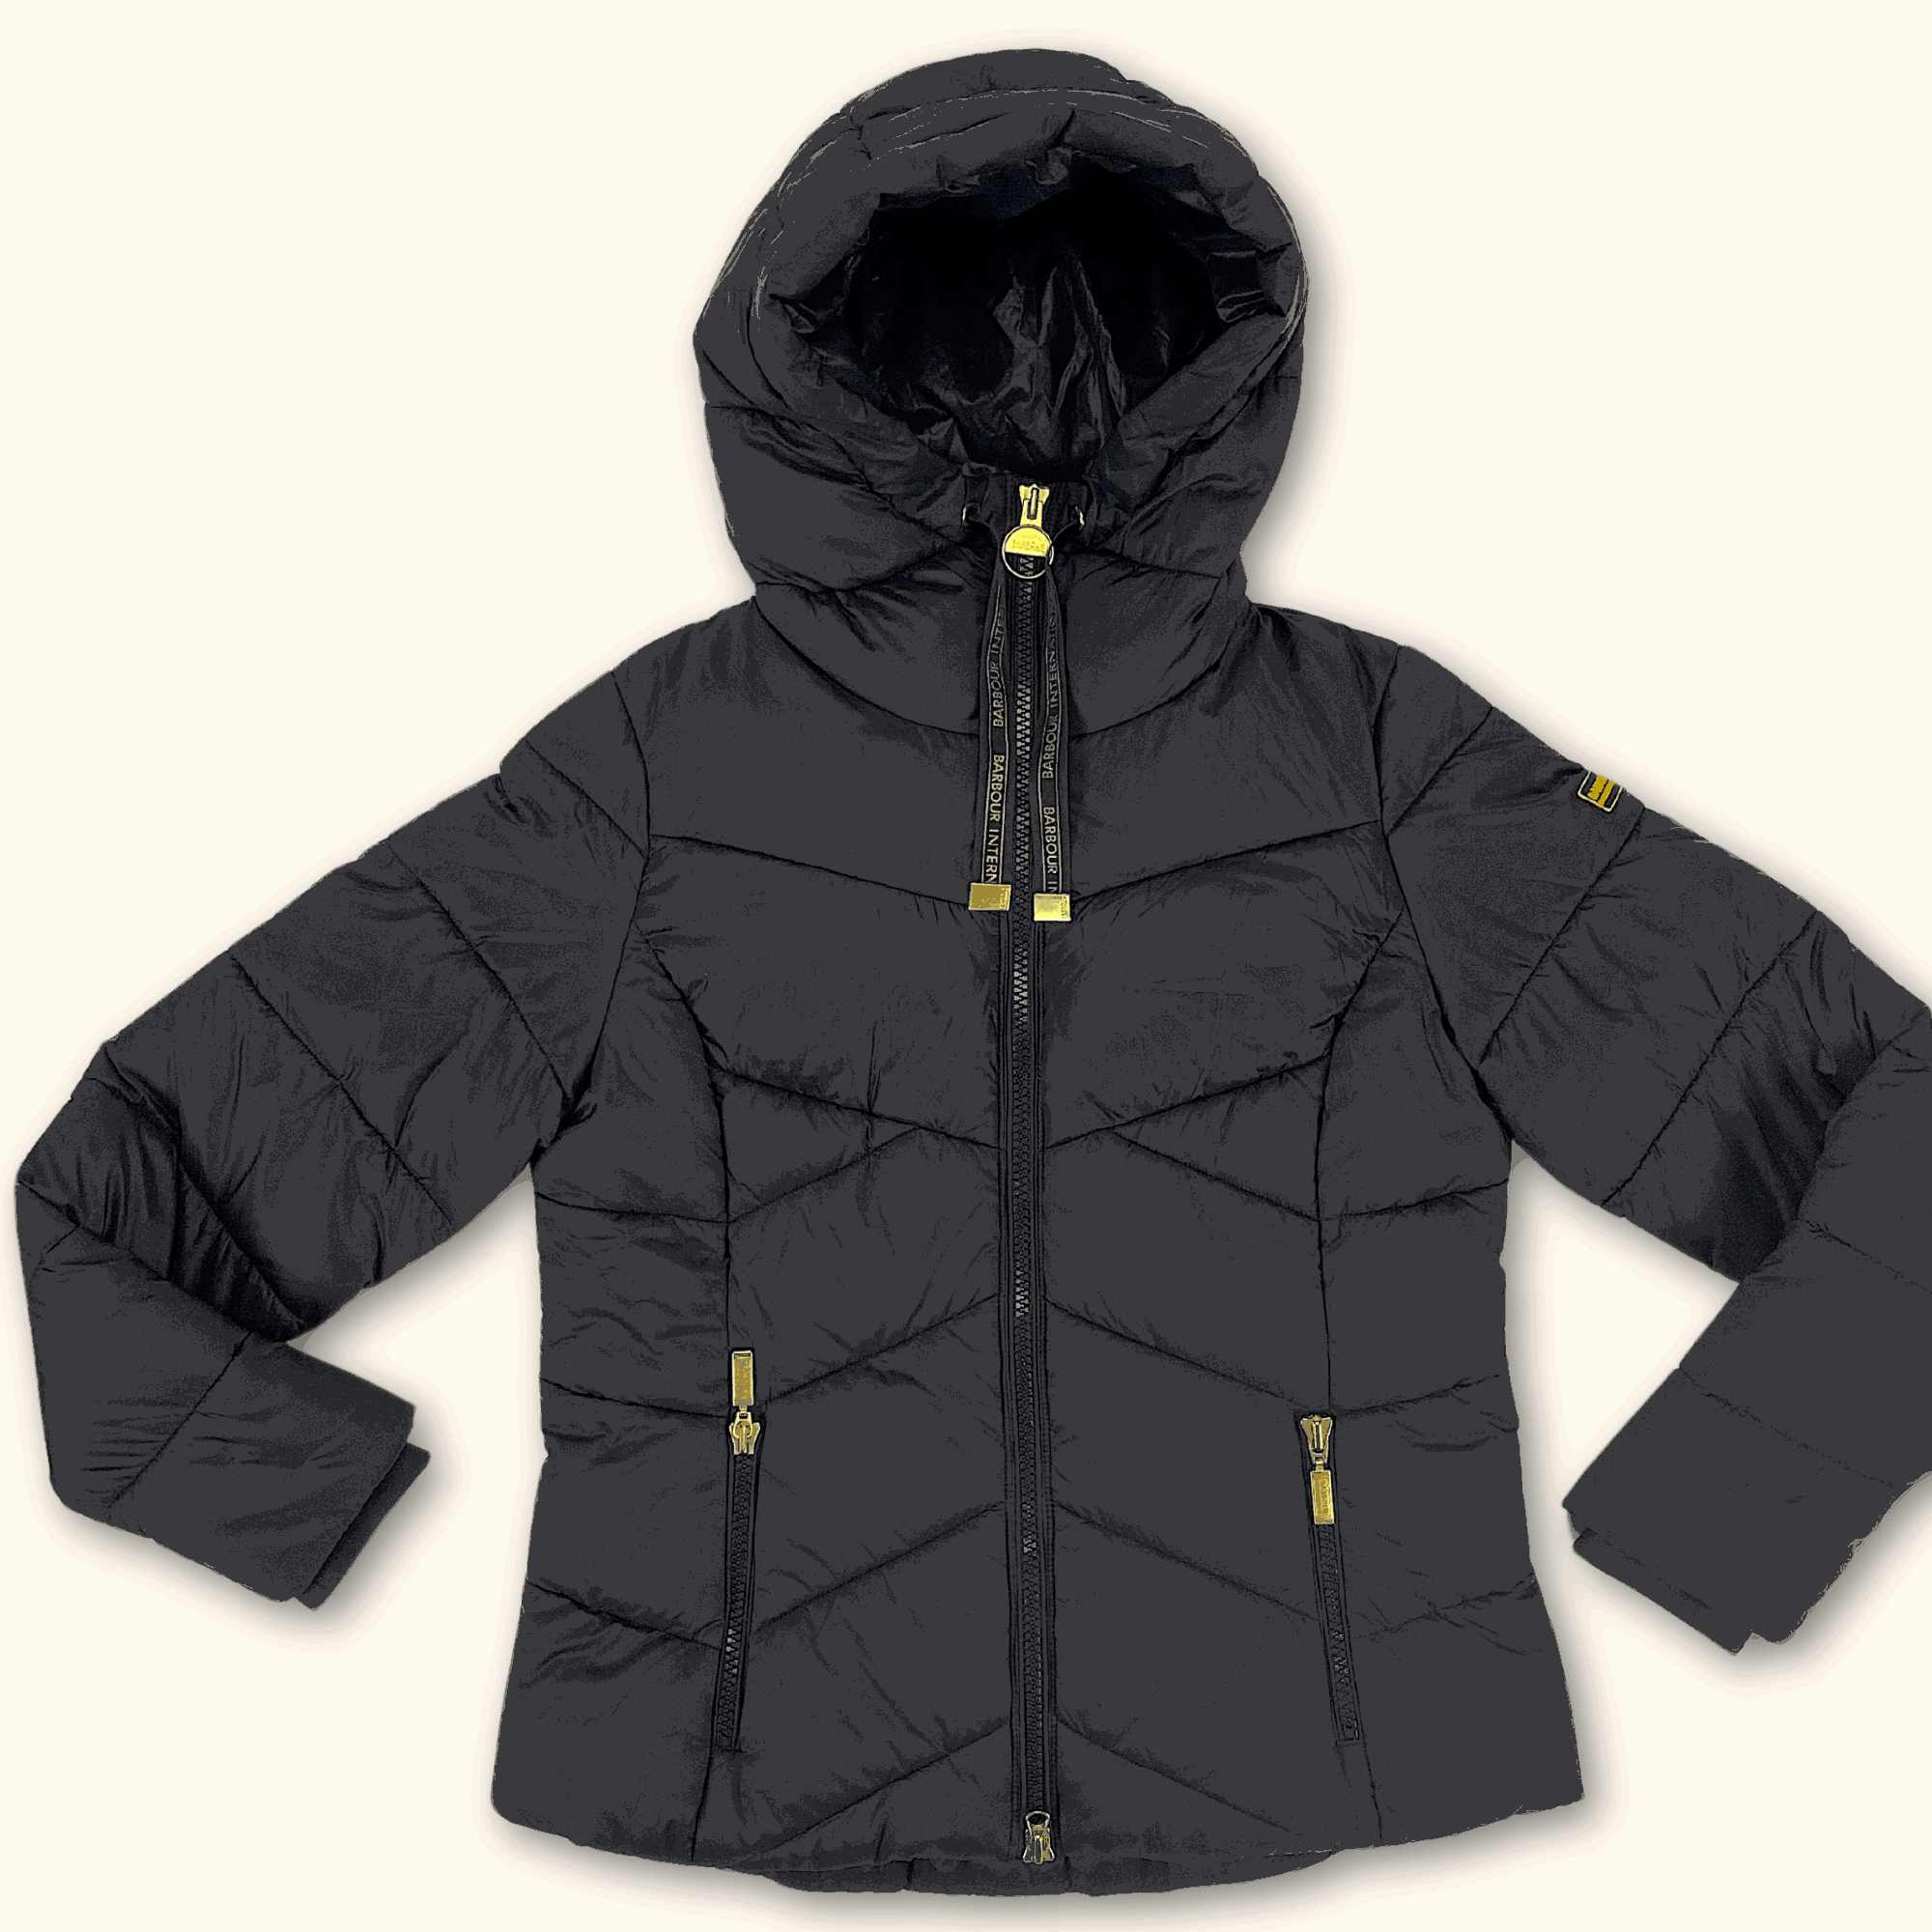 Barbour Brace Chevron Quilted Jacket with Hood Black - Size 12 - Barbour - Coats &amp; jackets